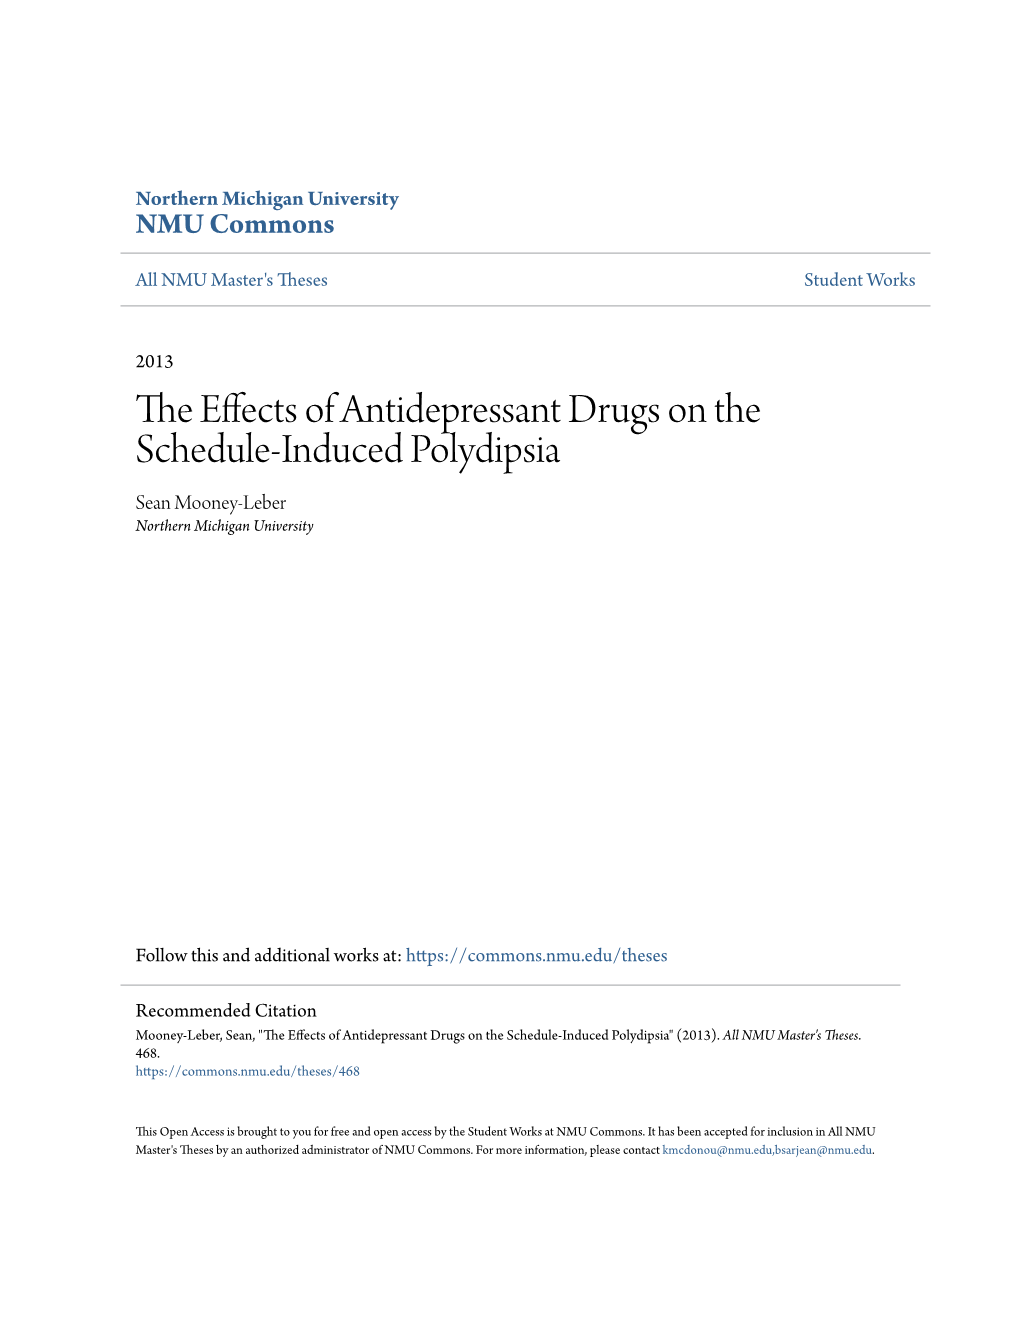 The Effects of Antidepressant Drugs on the Schedule-Induced Polydipsia" (2013)